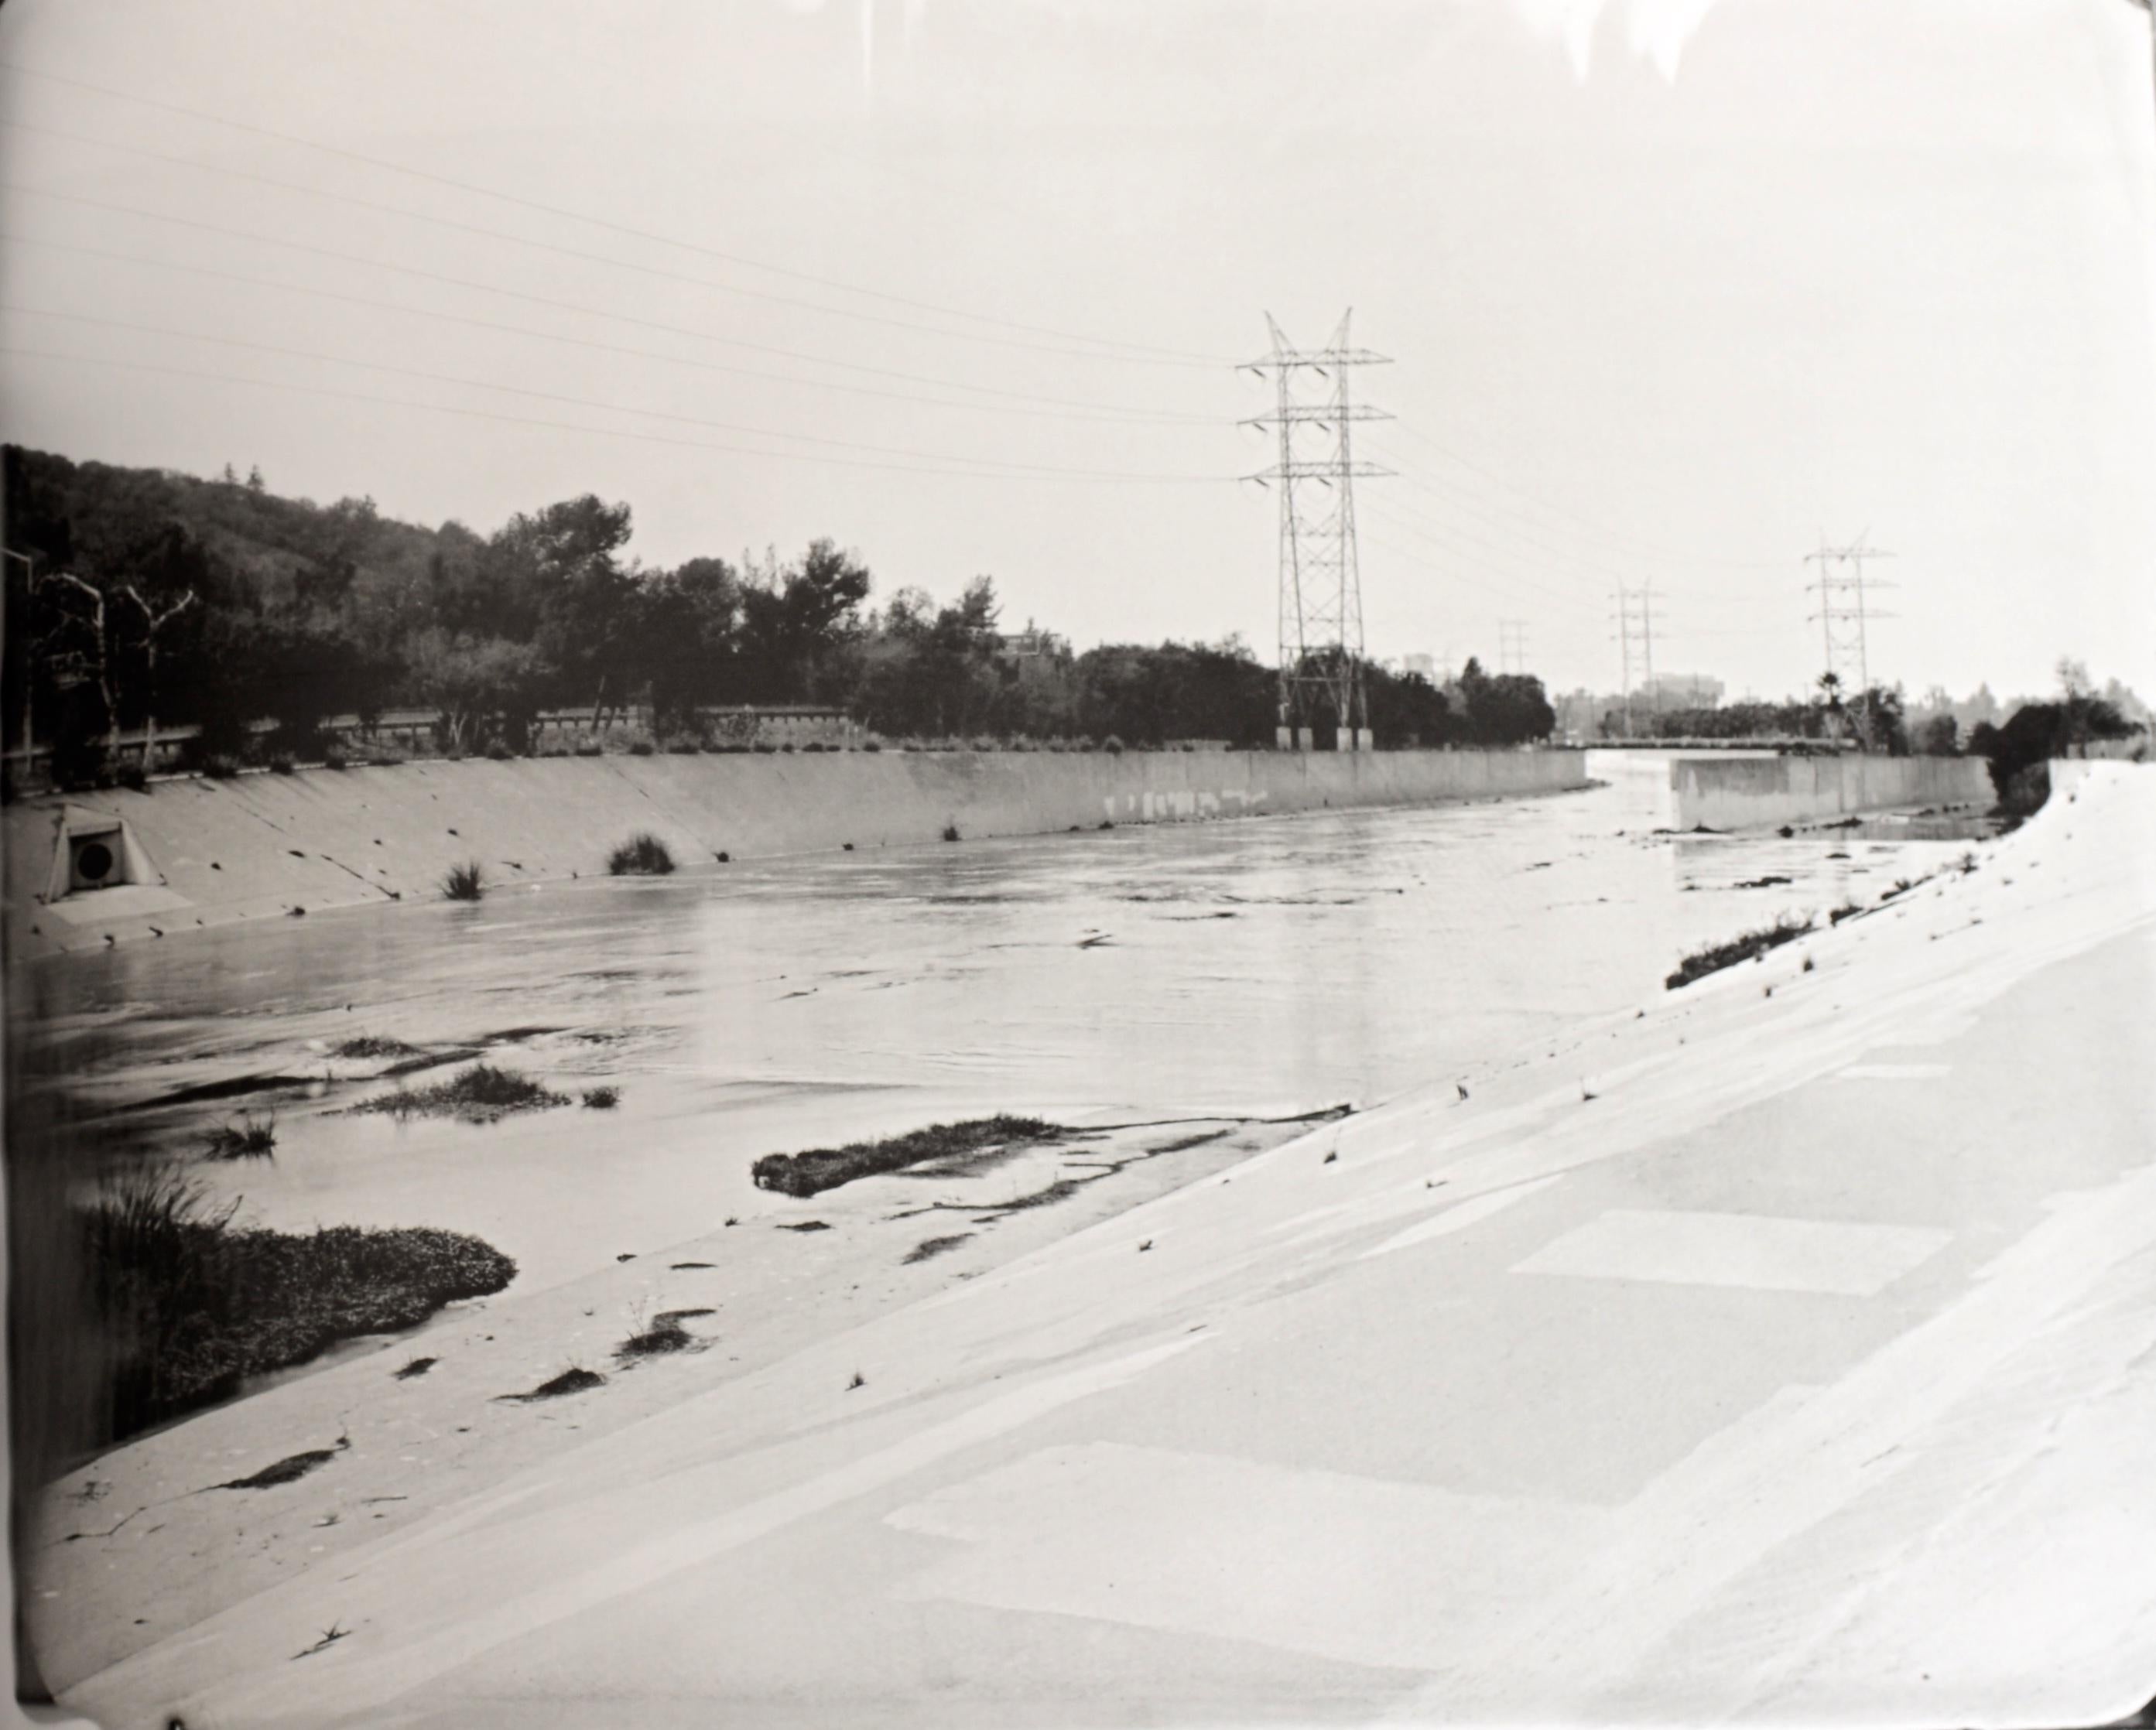 American L.A. River, Photos by Michael Kolster, 1st Ed